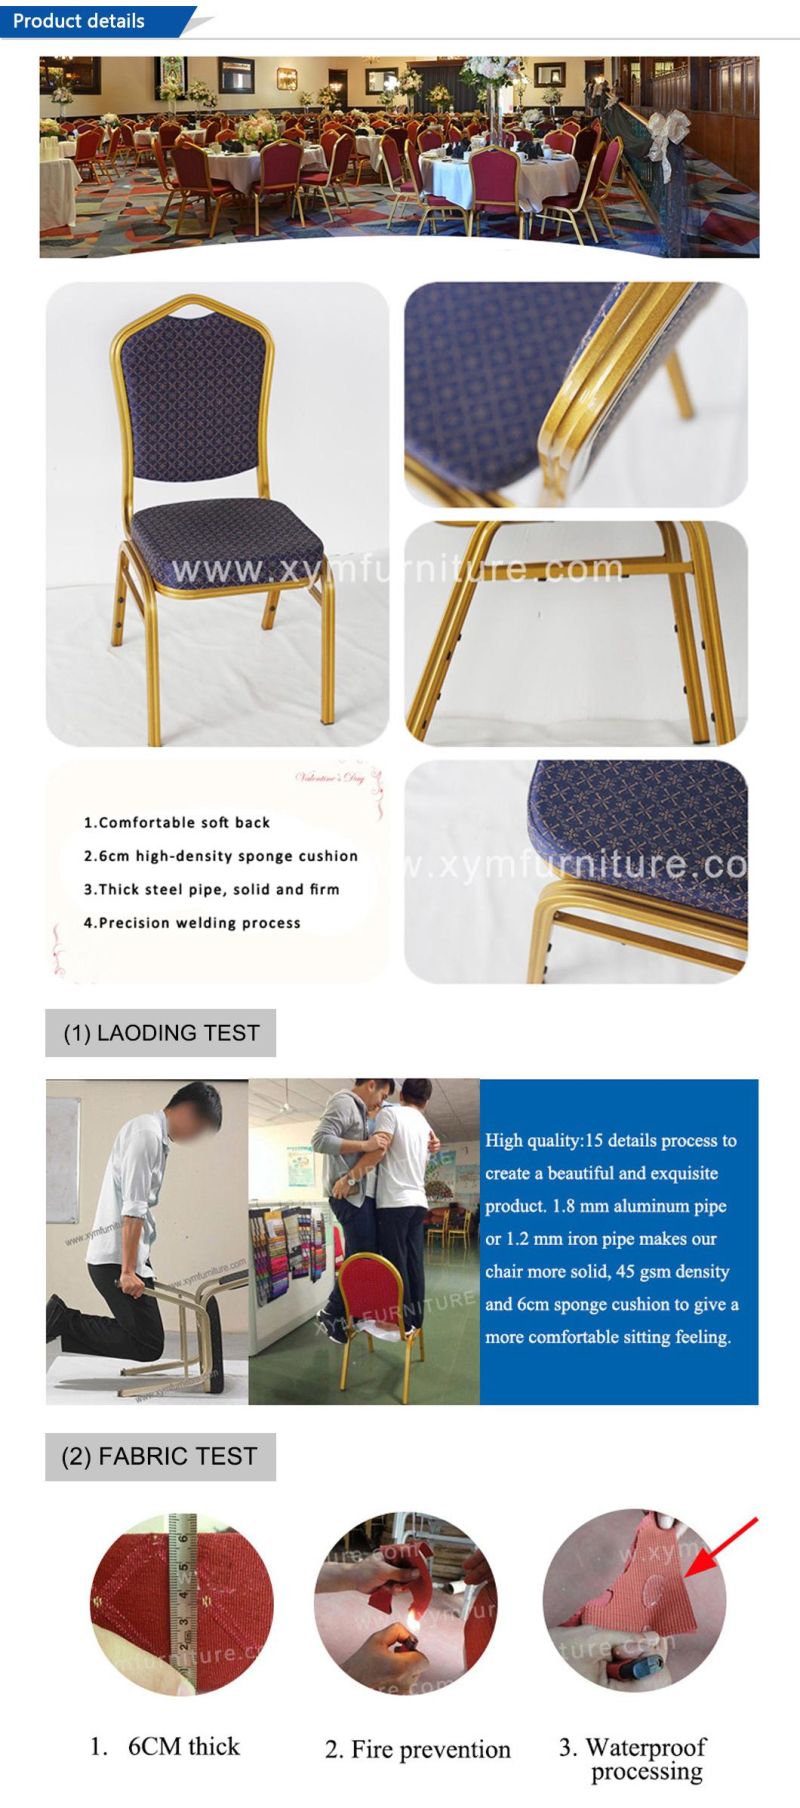 Hot Selling Good Quality Hotel Aluminum Modern Chair